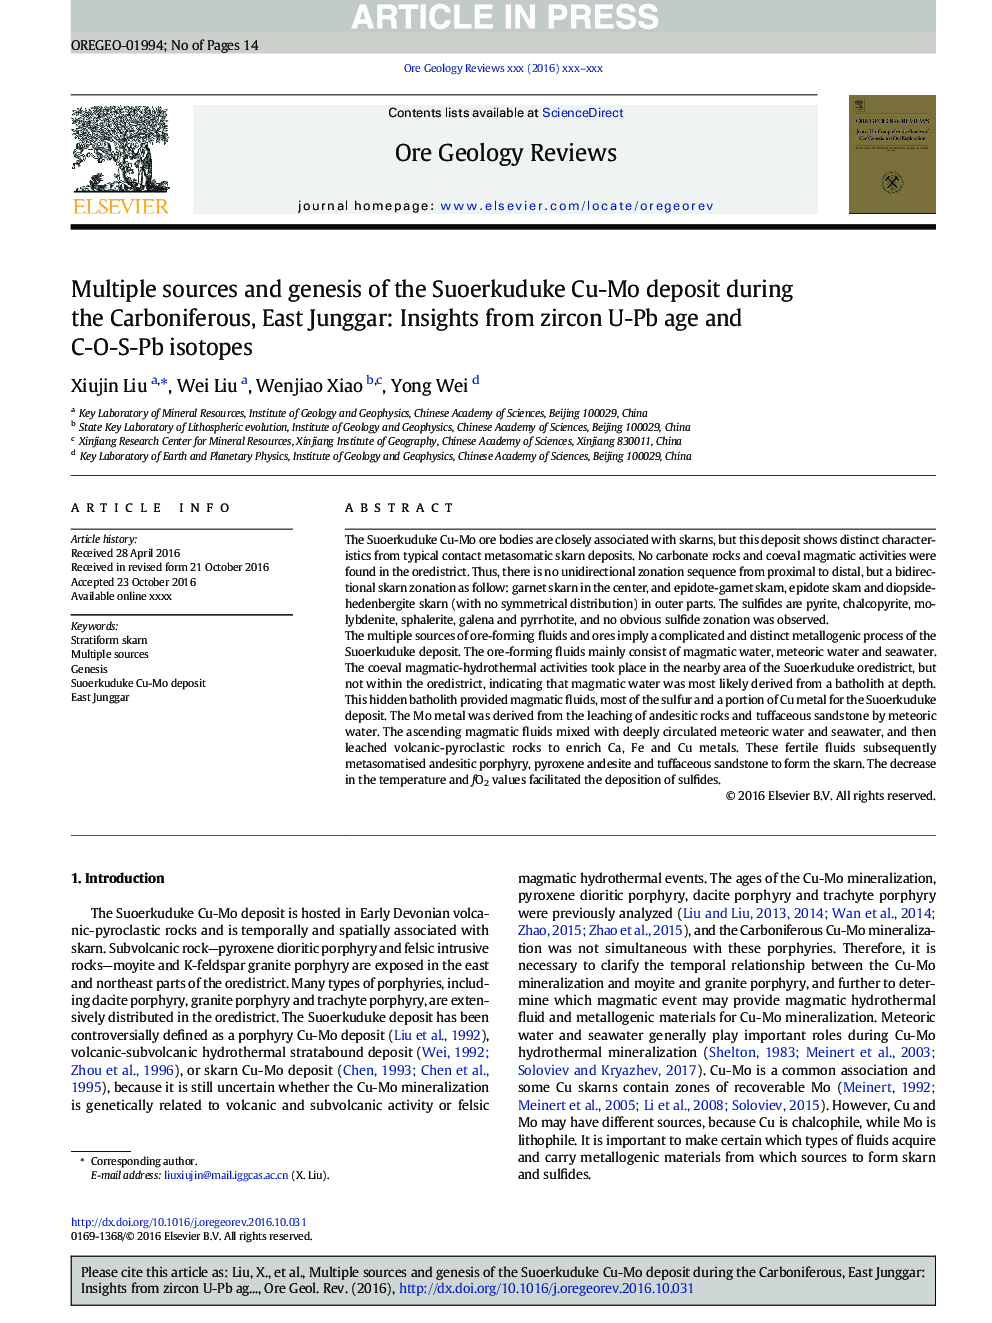 Multiple sources and genesis of the Suoerkuduke Cu-Mo deposit during the Carboniferous, East Junggar: Insights from zircon U-Pb age and C-O-S-Pb isotopes